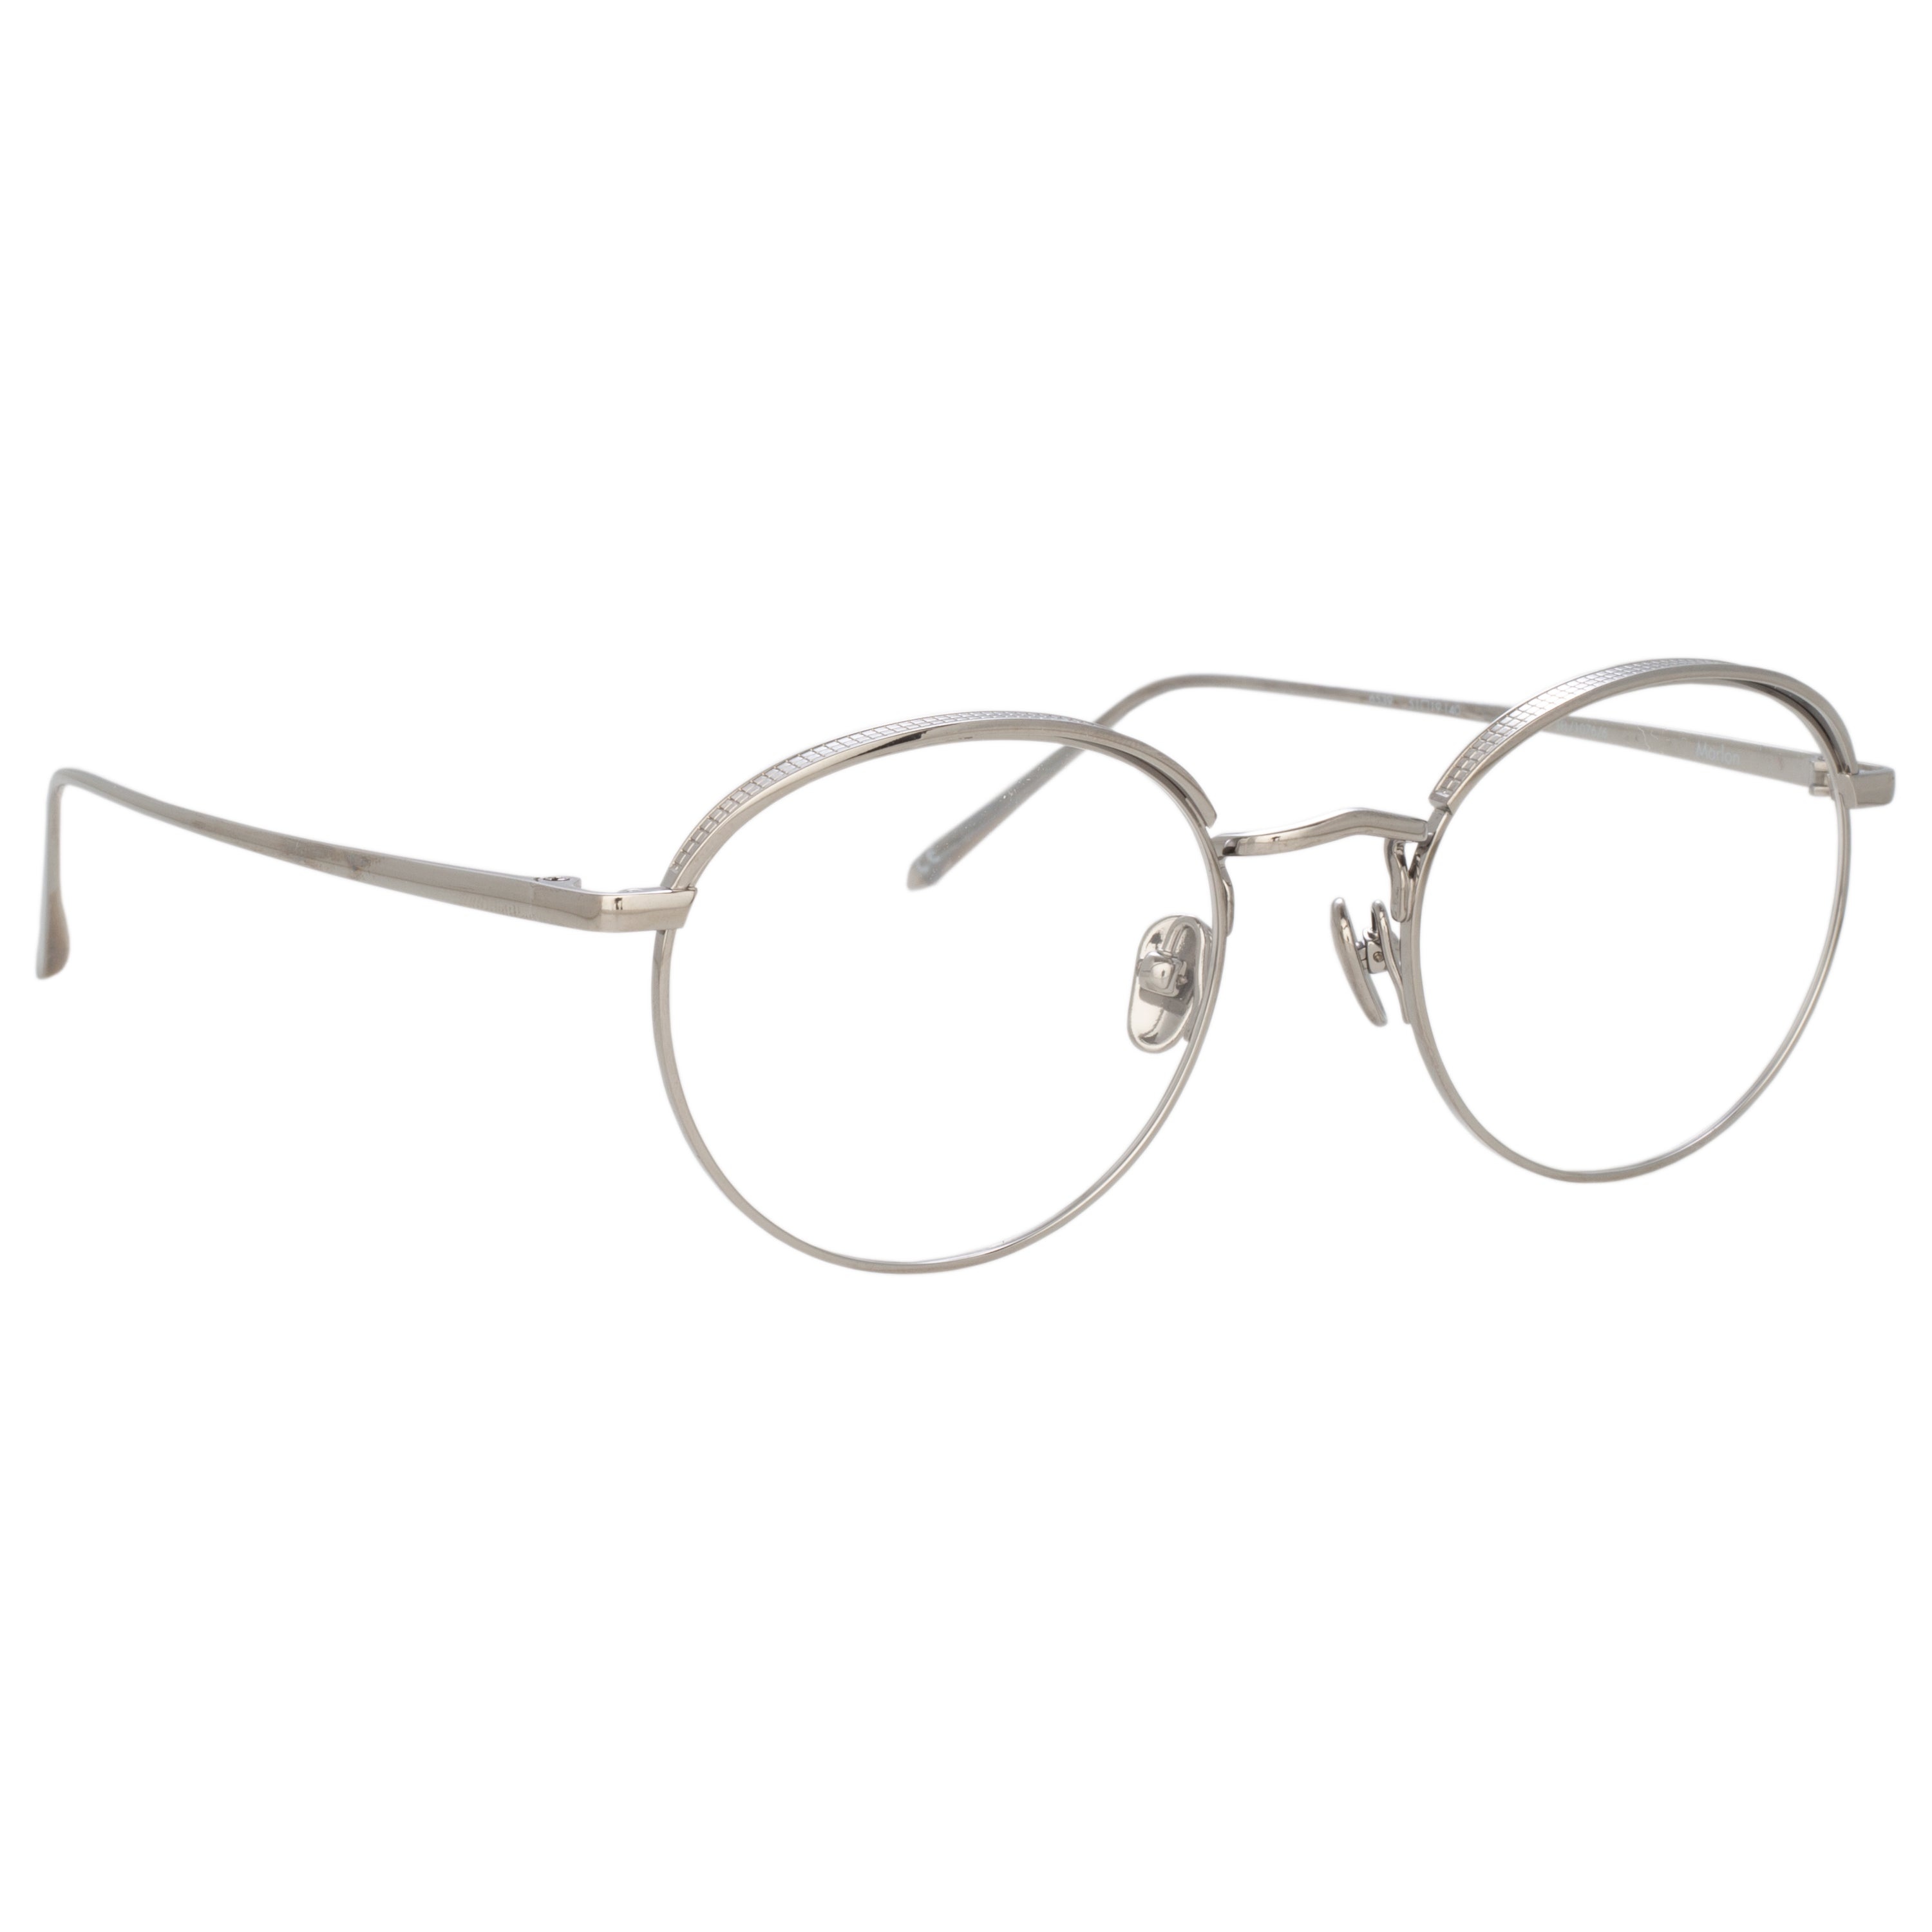 THE MARLON | OVAL OPTICAL FRAME IN WHITE GOLD (C6) - 4